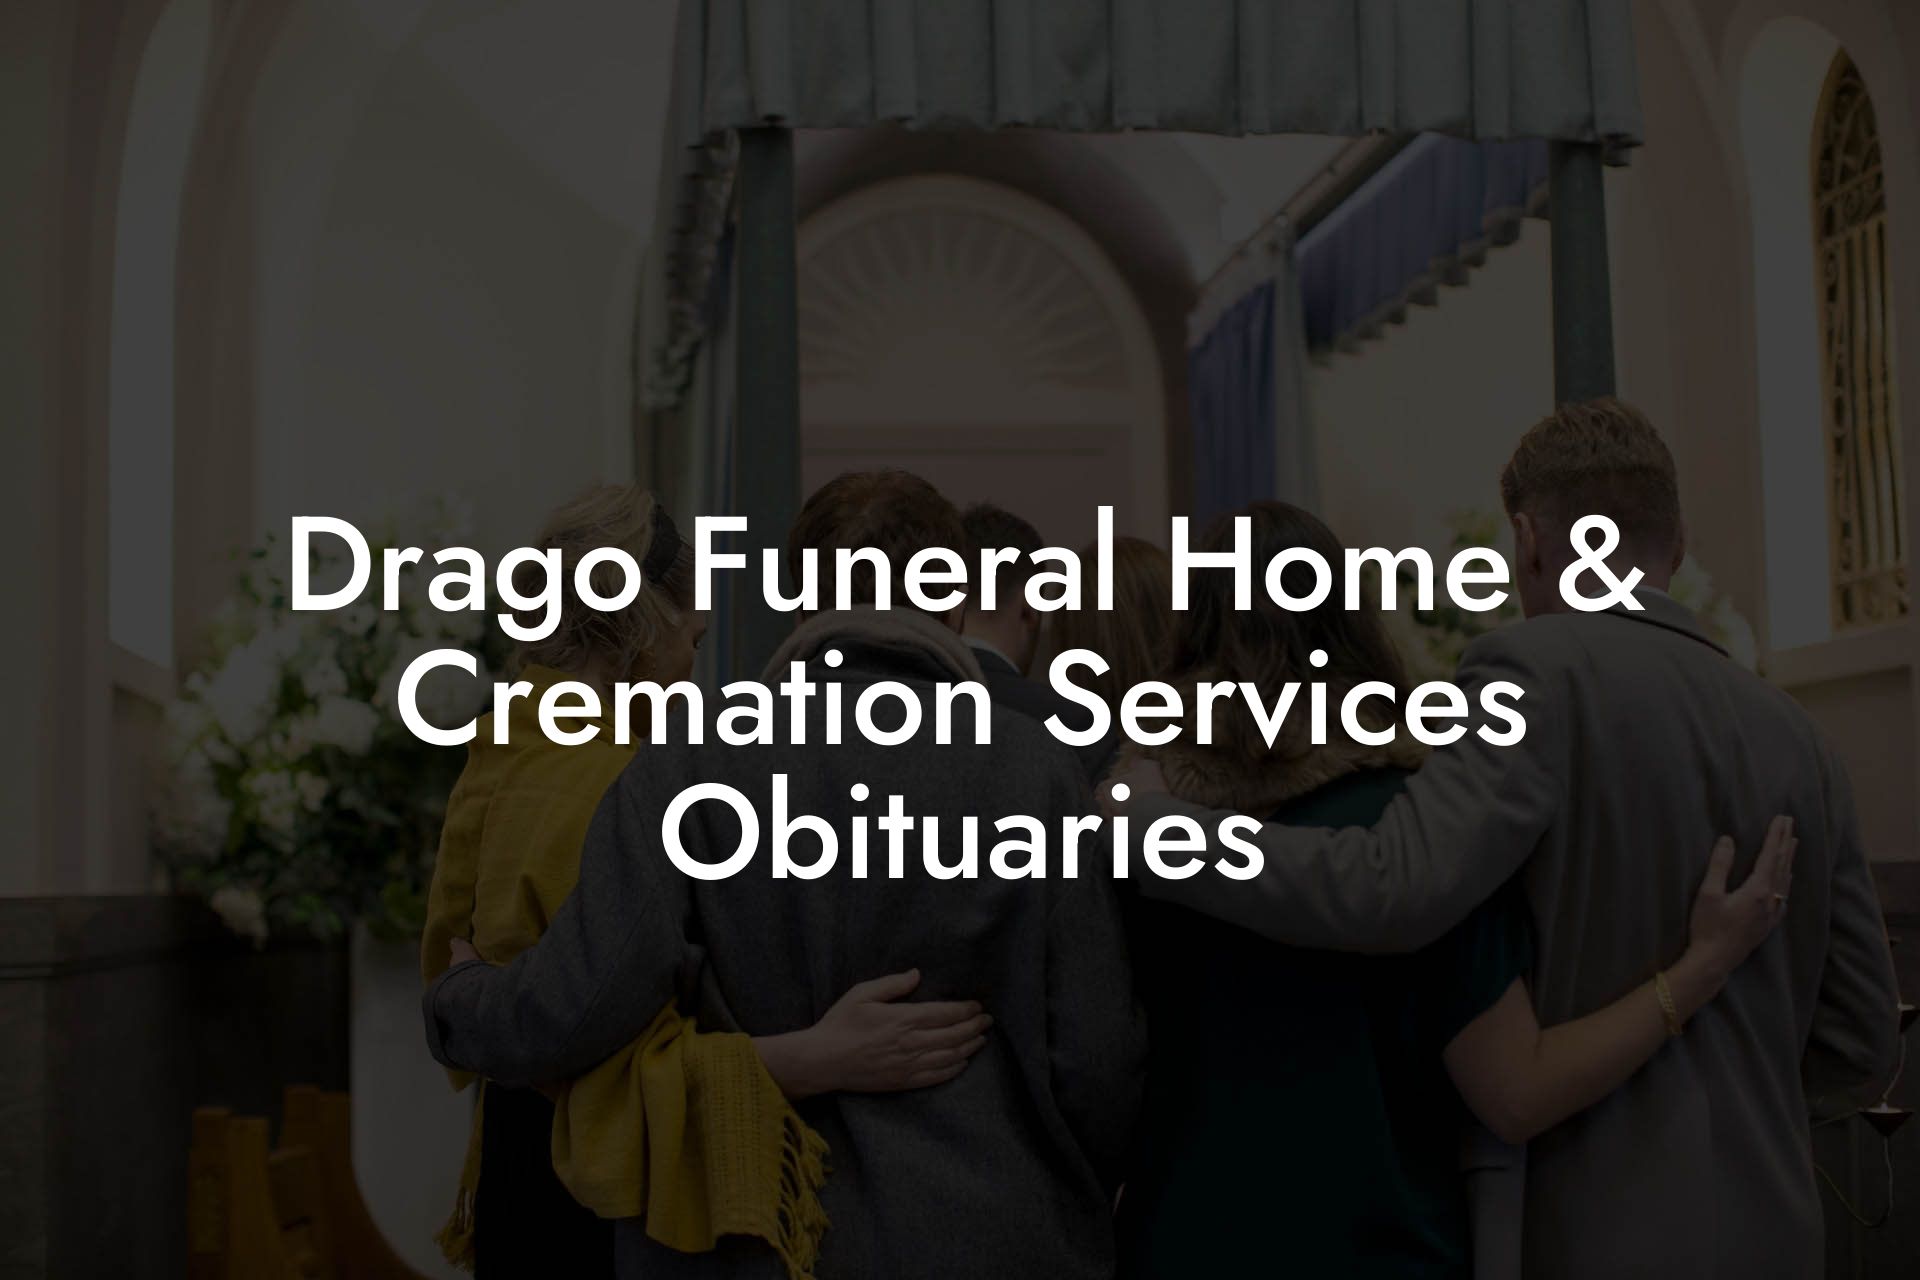 Drago Funeral Home & Cremation Services Obituaries